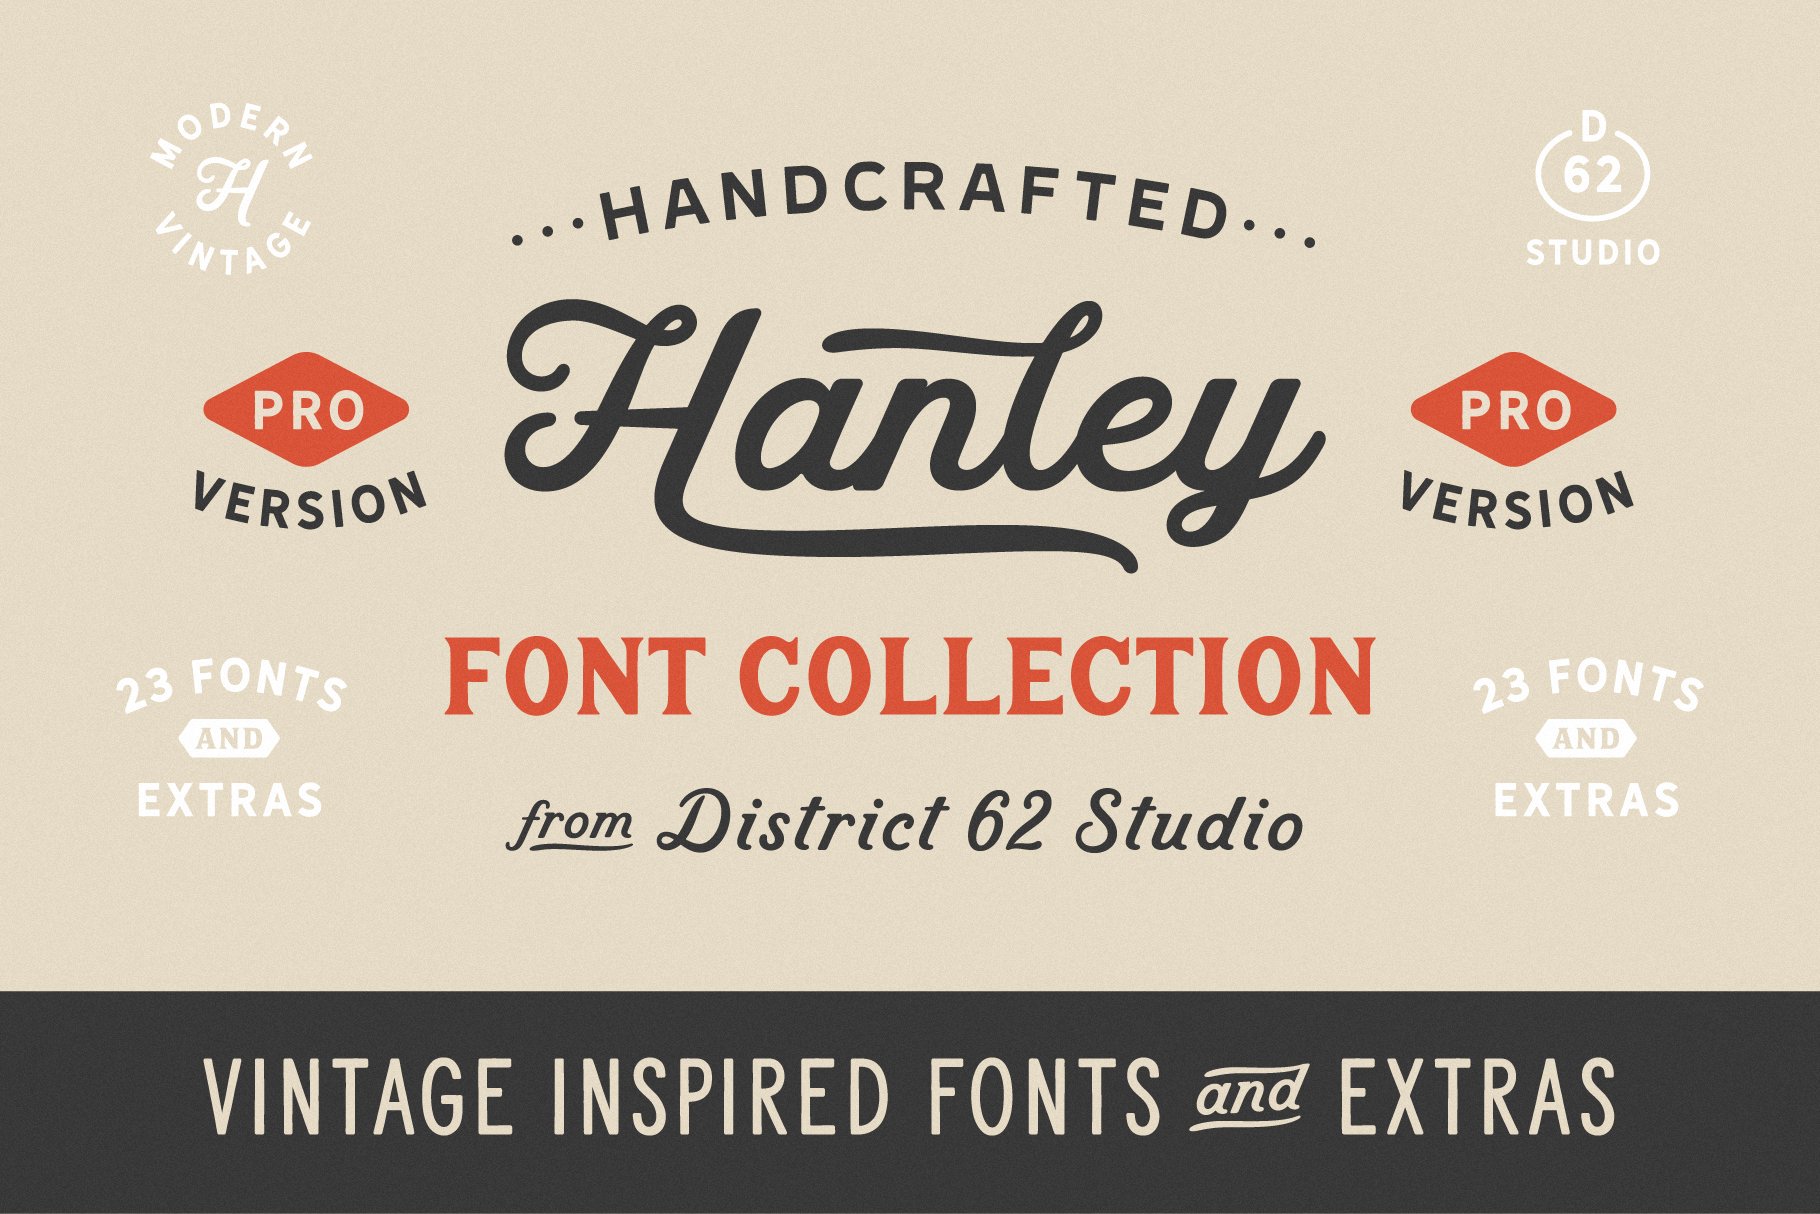 Hanley Pro Font Collection cover image.